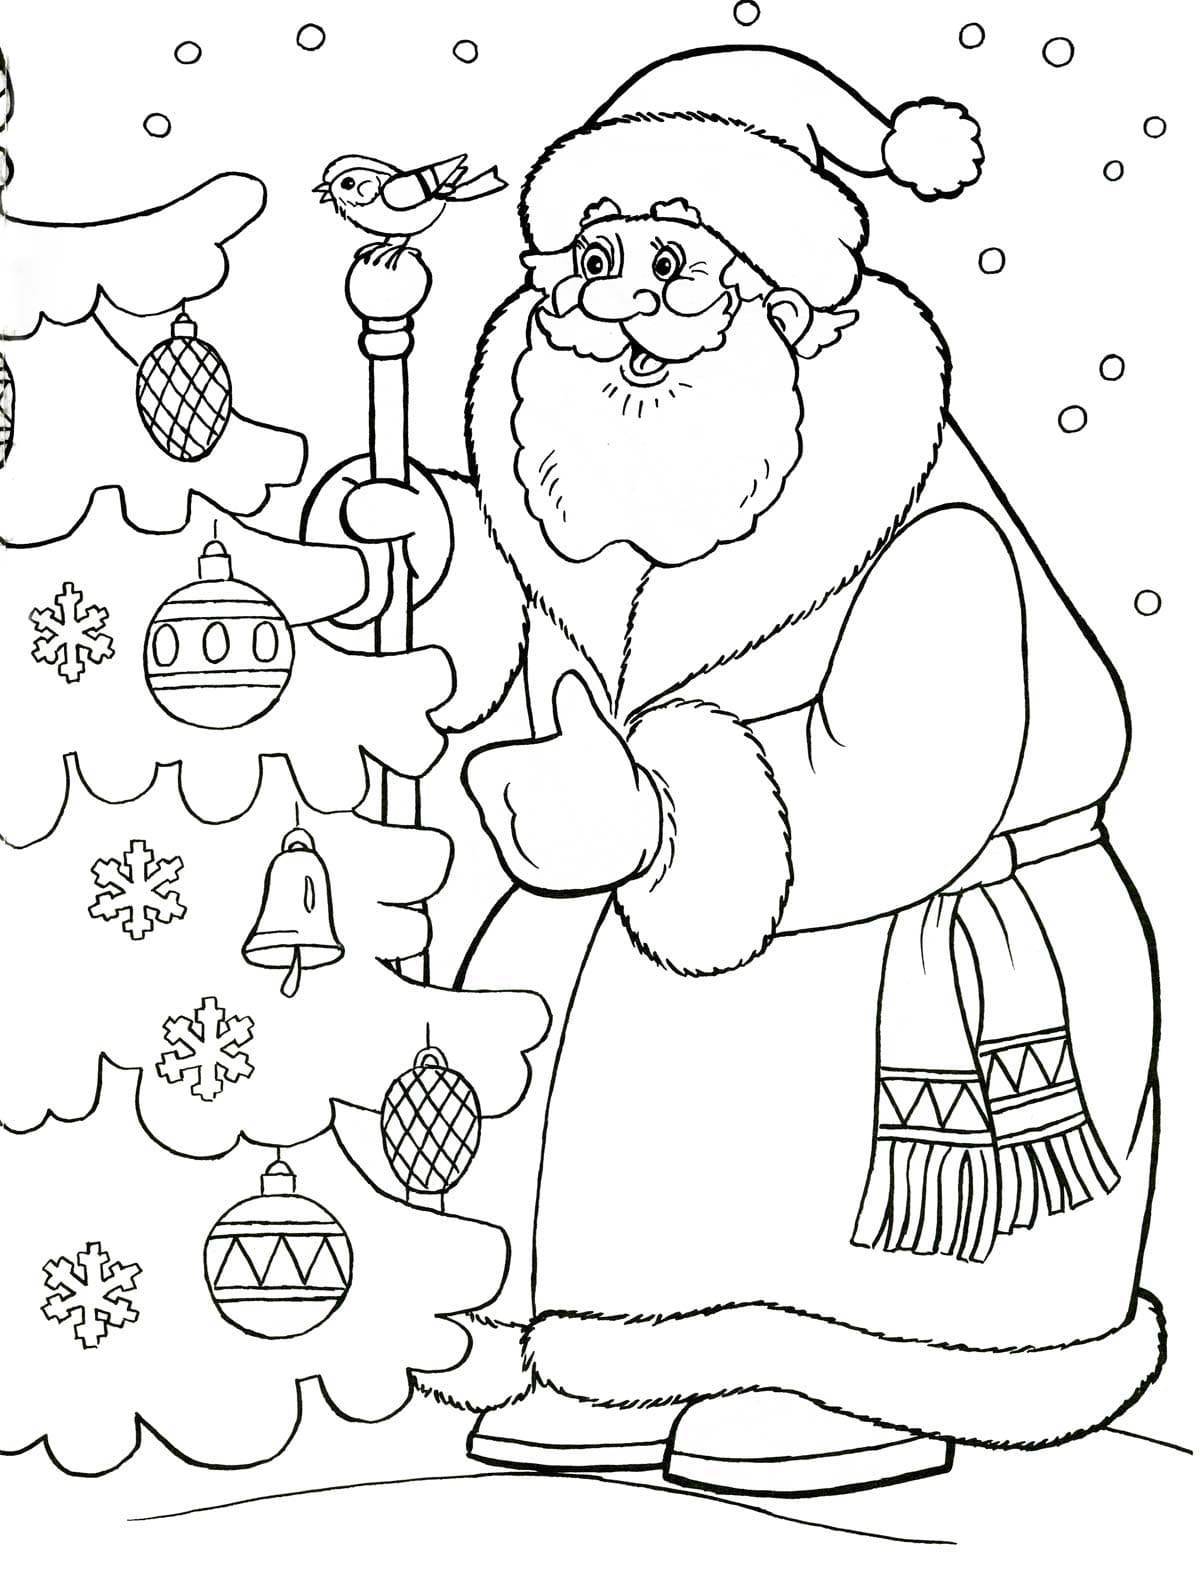 Exciting snow maiden coloring book